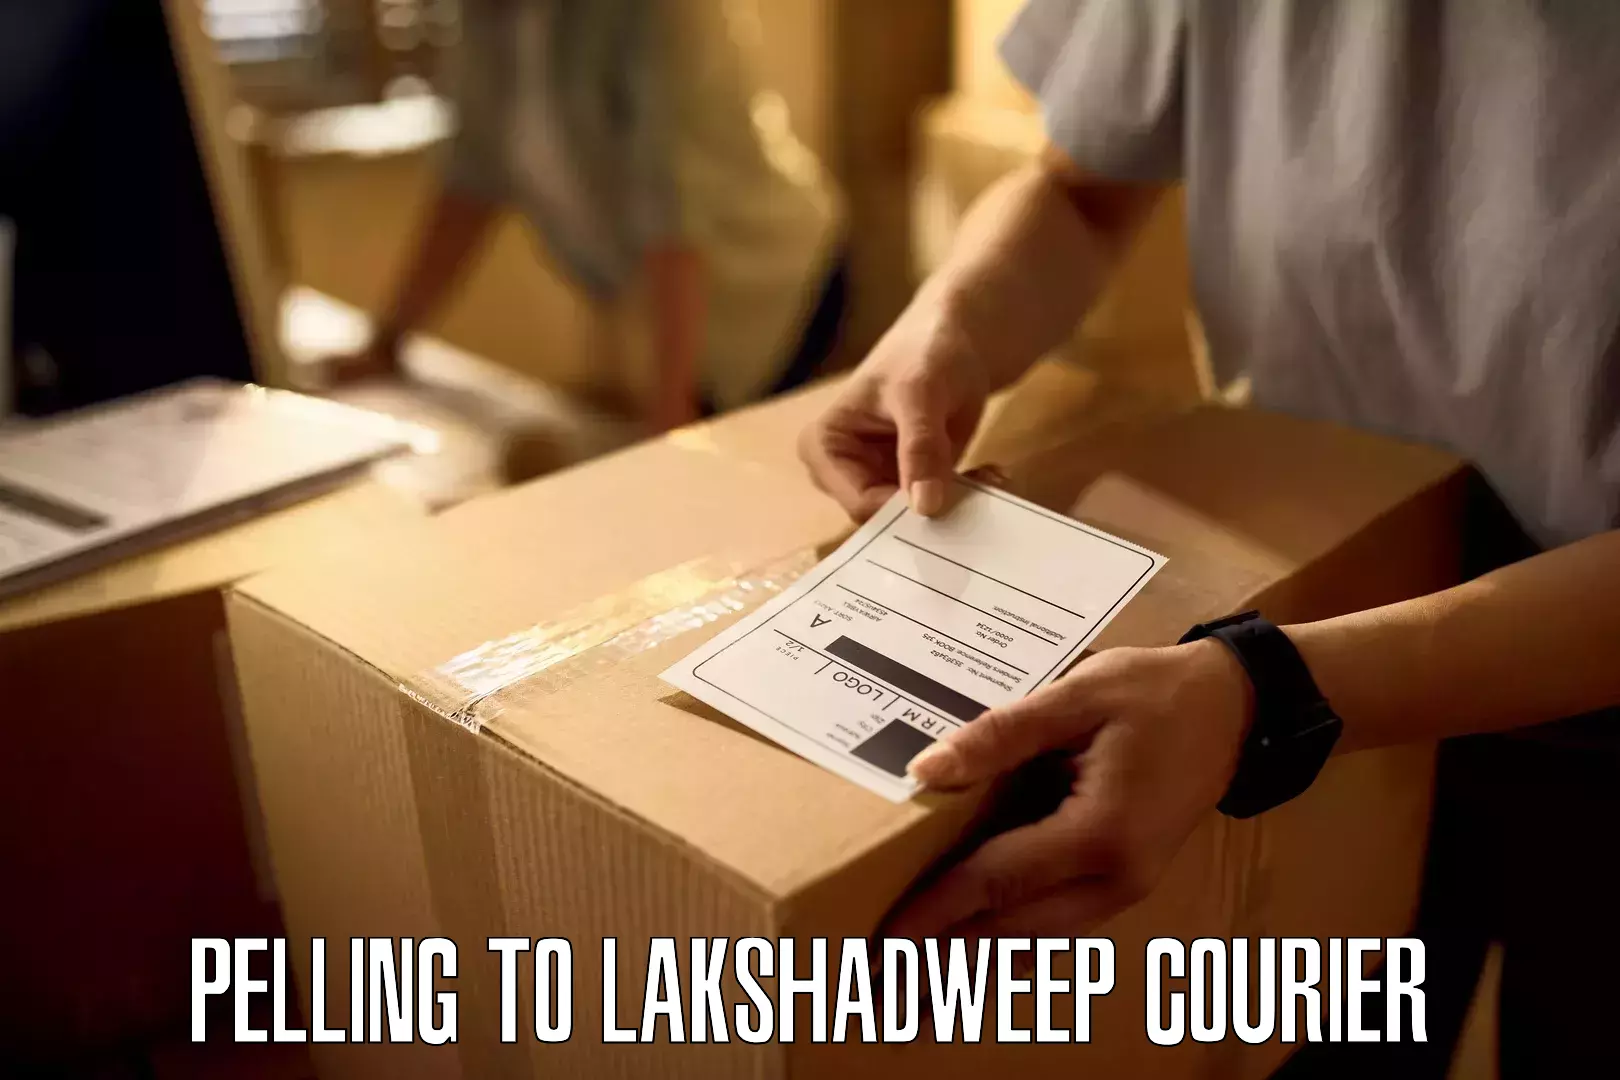 User-friendly delivery service Pelling to Lakshadweep